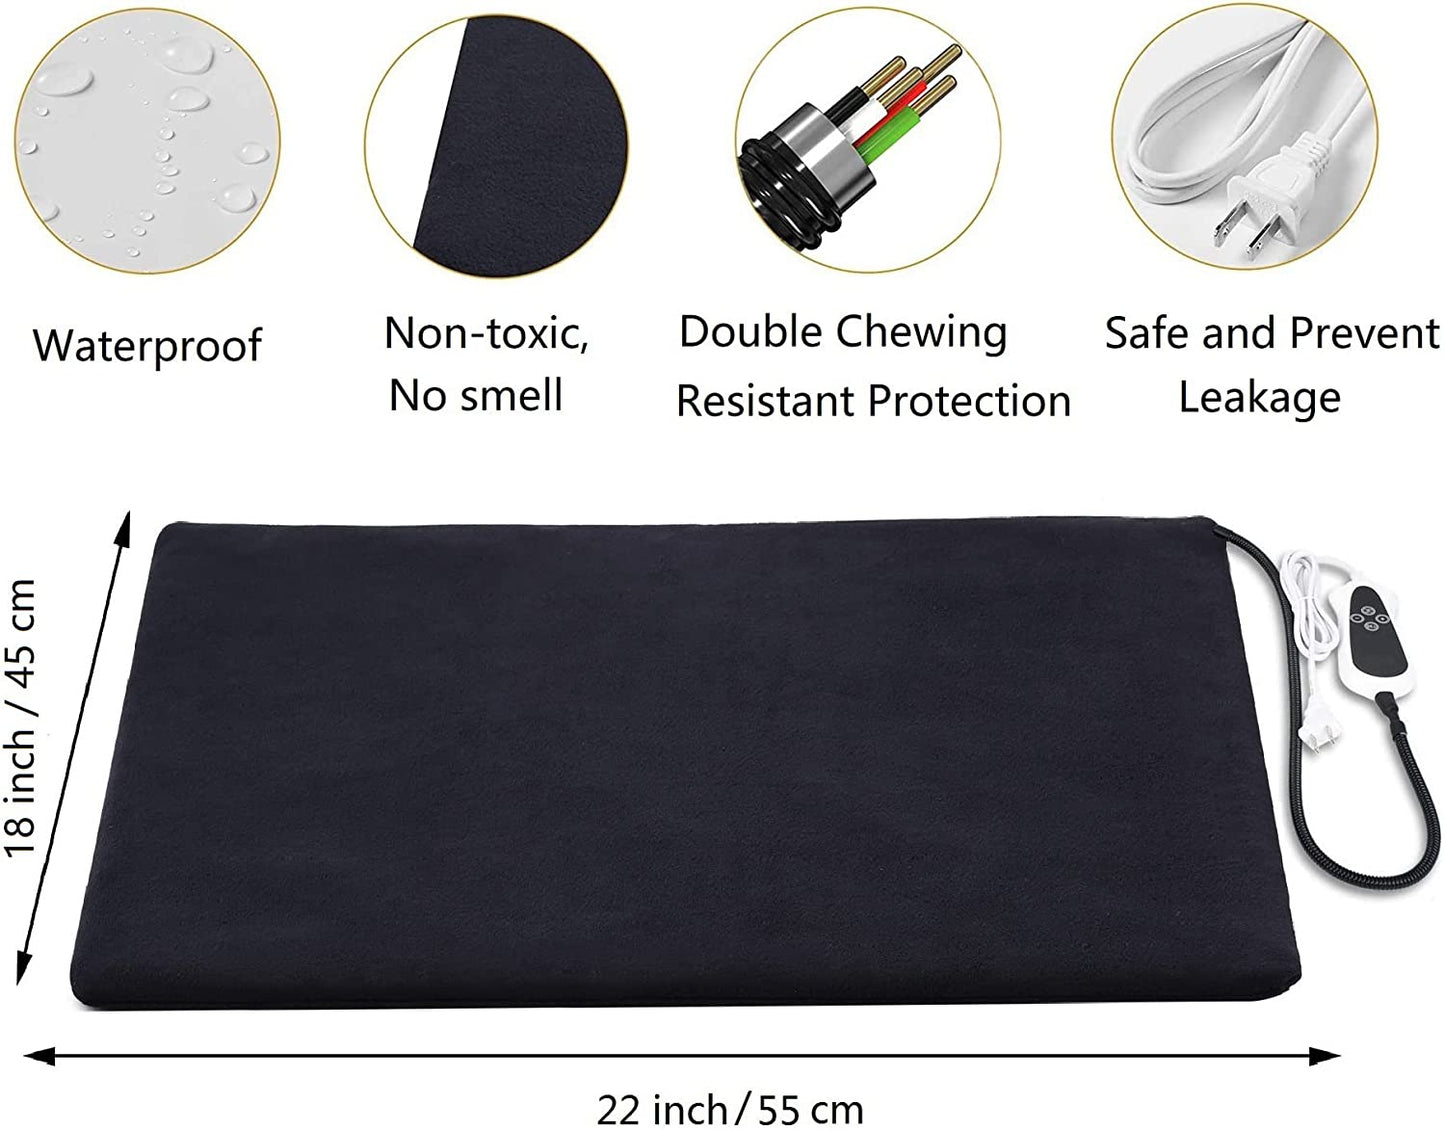 "Keep your furry friends warm and cozy with our adjustable electric heating pad! Perfect for cats and dogs, this waterproof pet mat features a timer for your convenience. Say goodbye to cold nights and hello to ultimate comfort!"